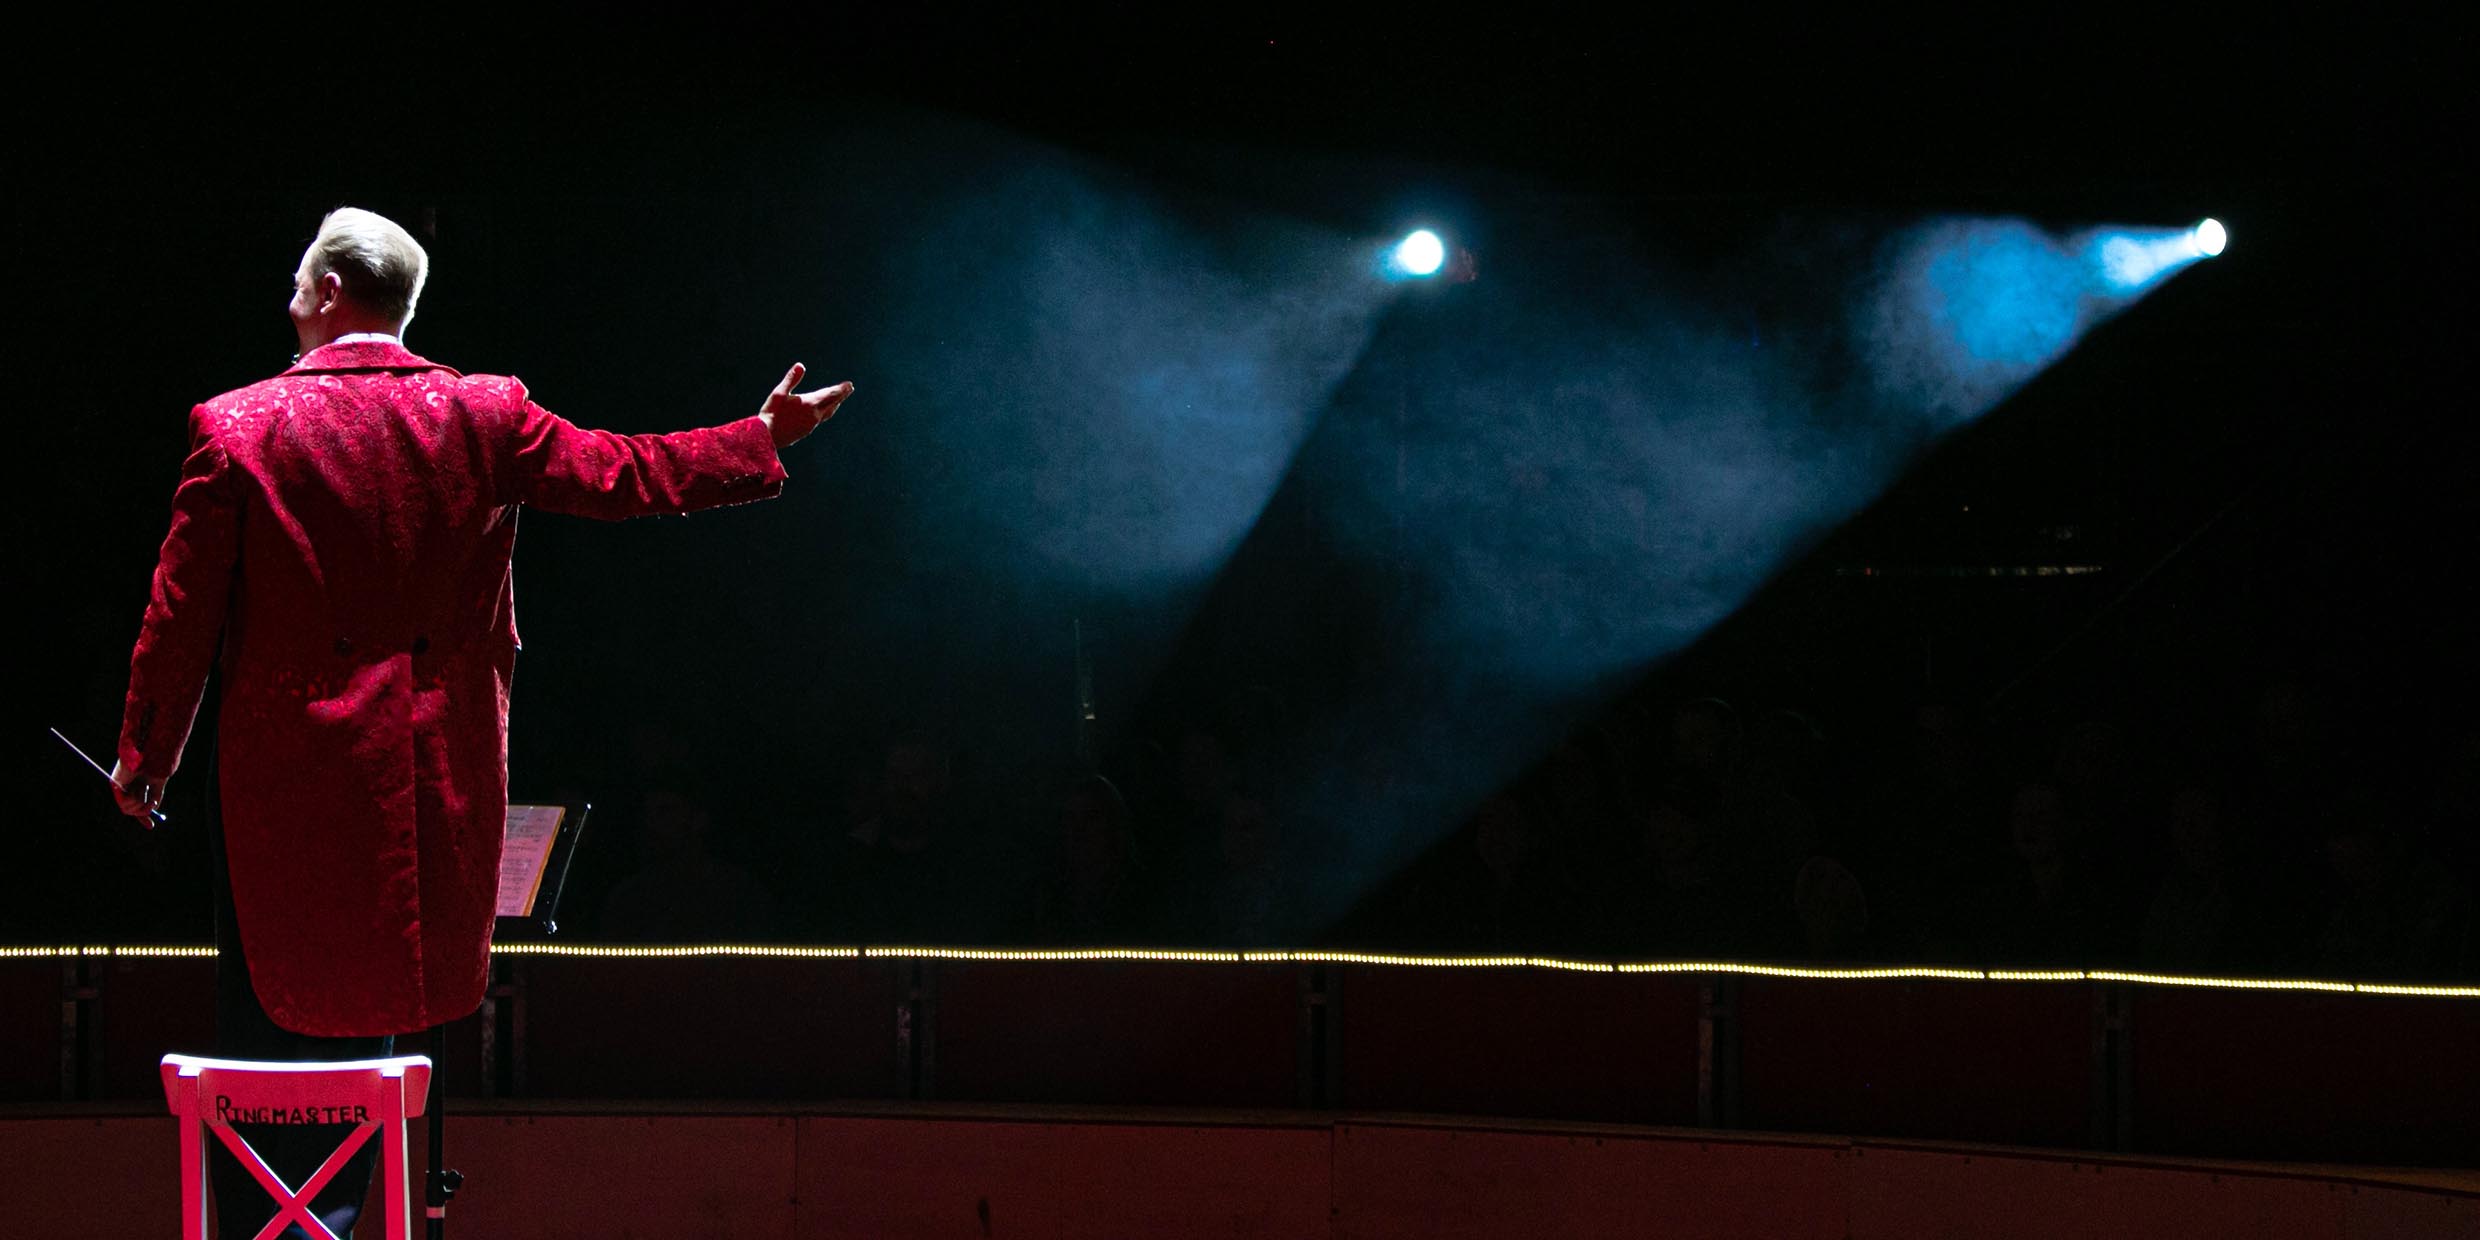 Image of a circus ringmaster gesturing to an unseen audience